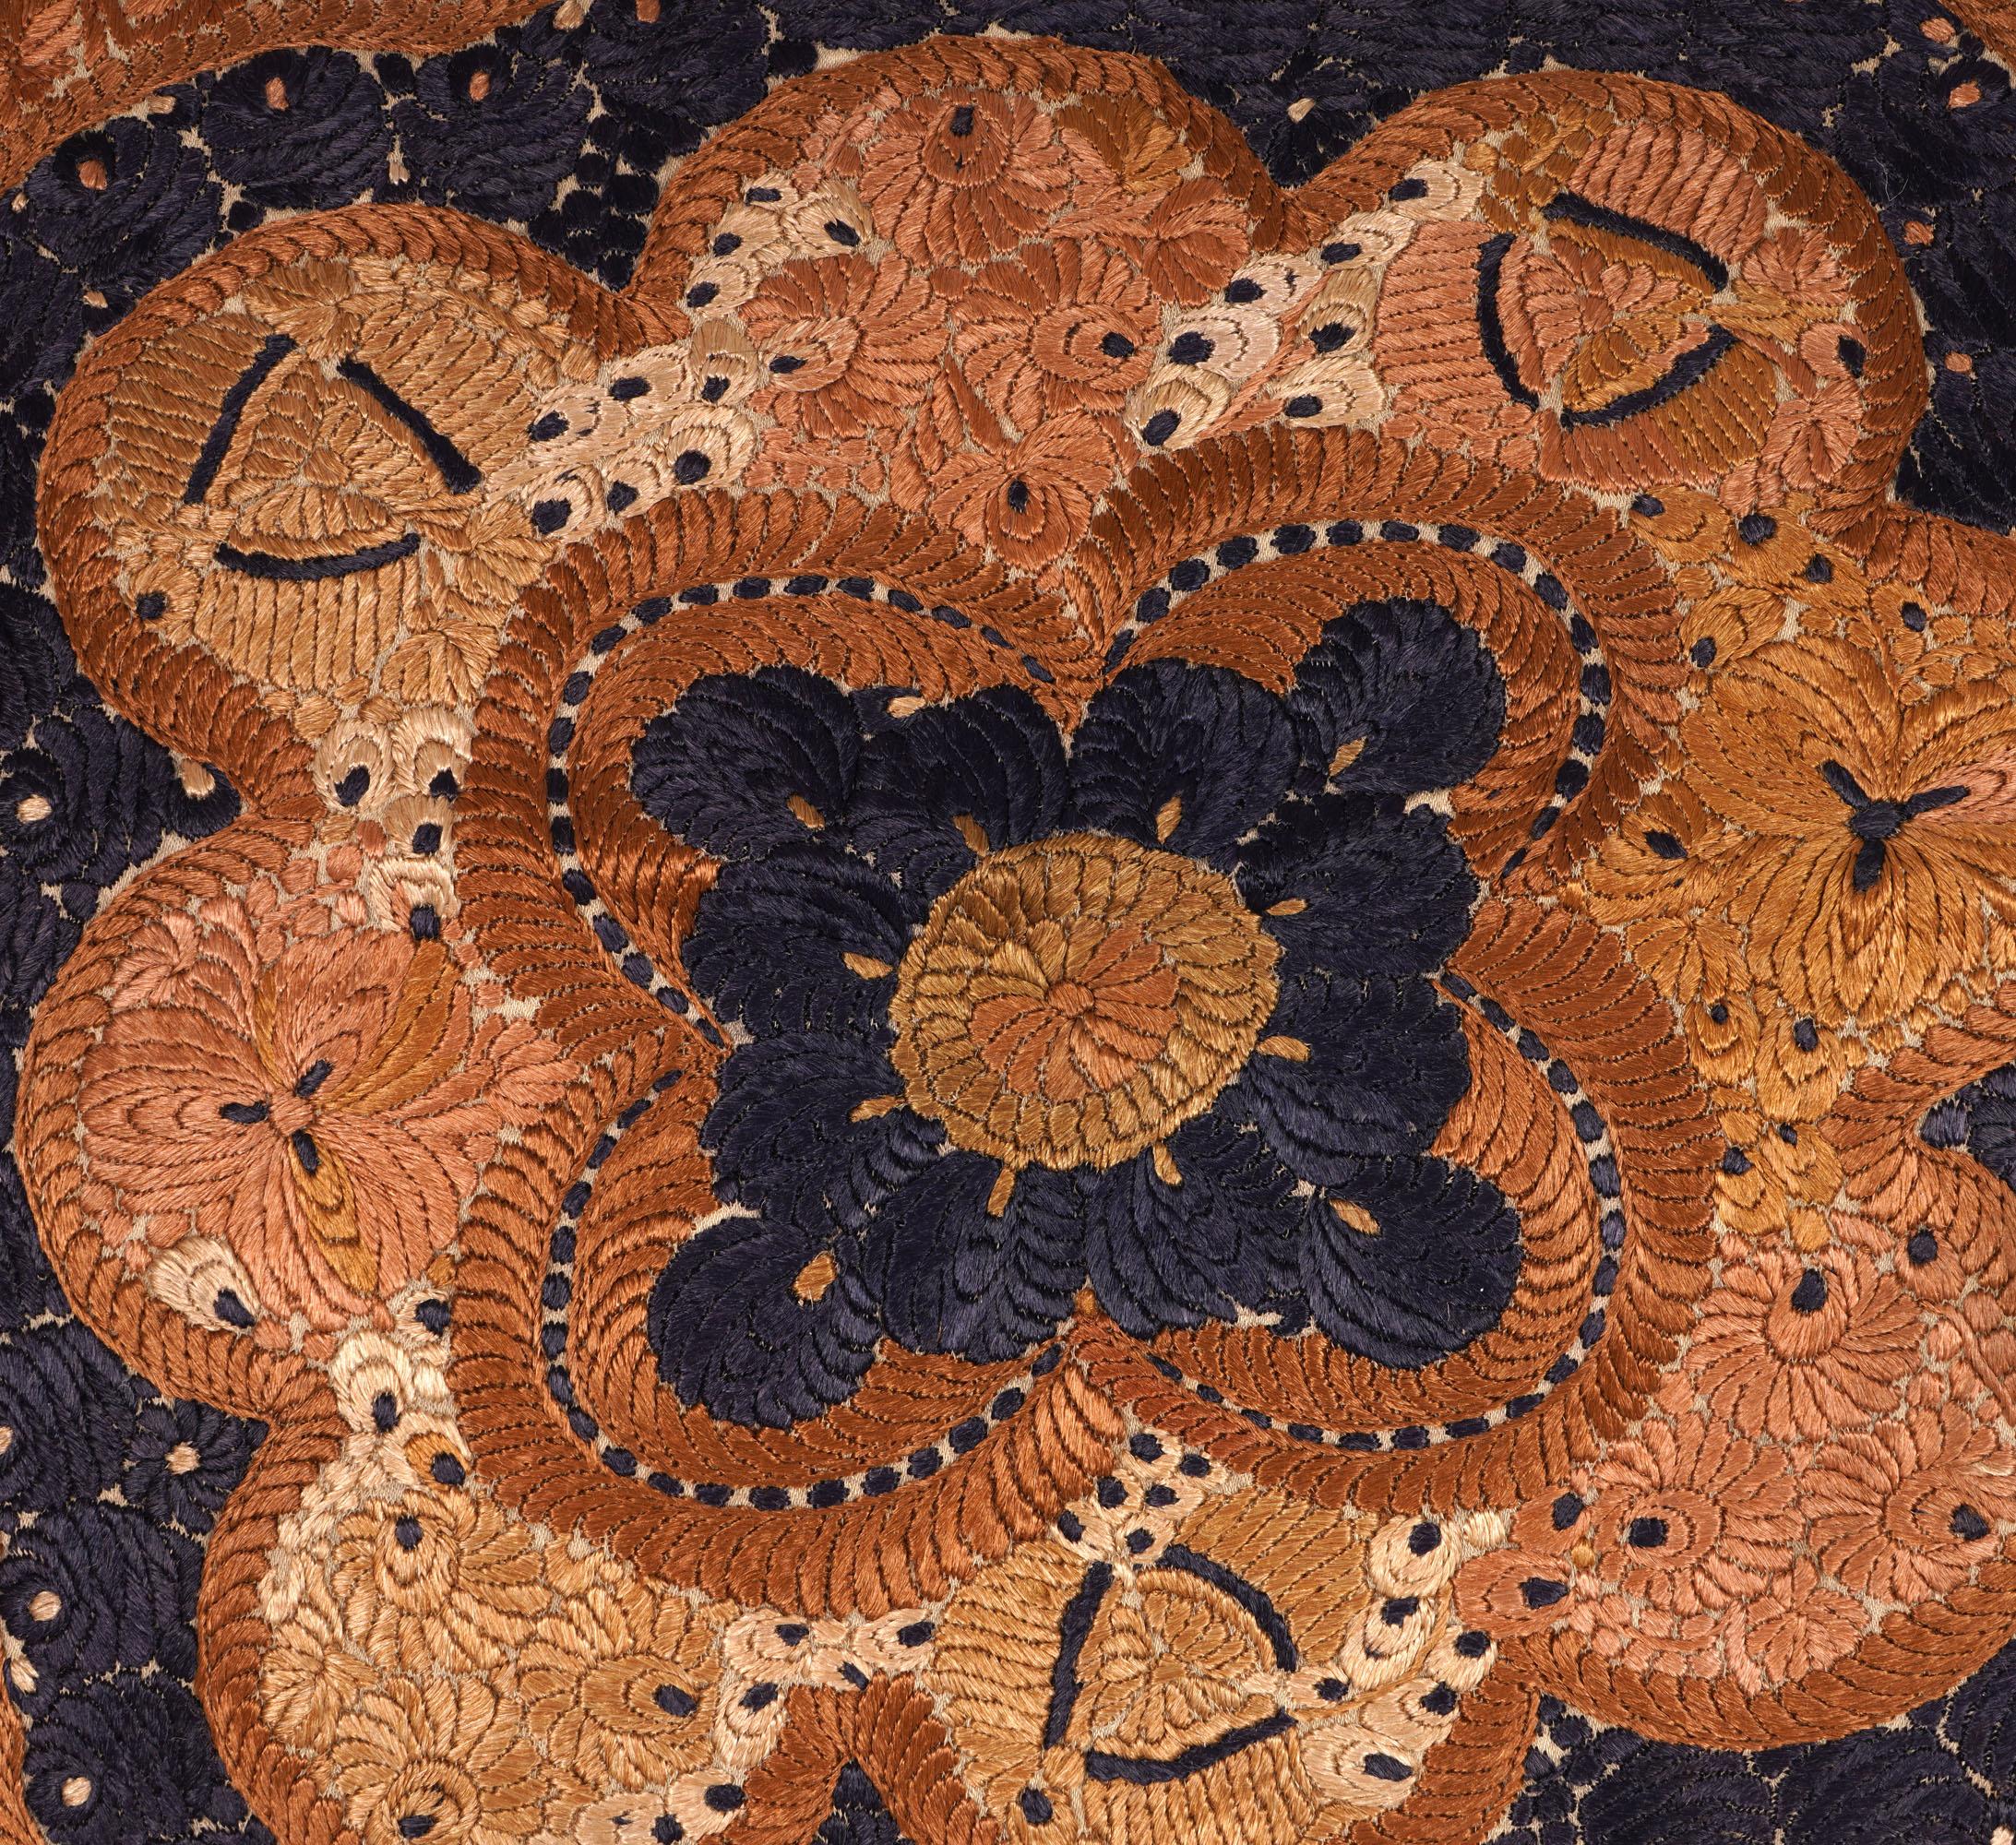 Hungarian Pillowcase Made from a Matyo Embroidery, Hungary, Early 20th C.